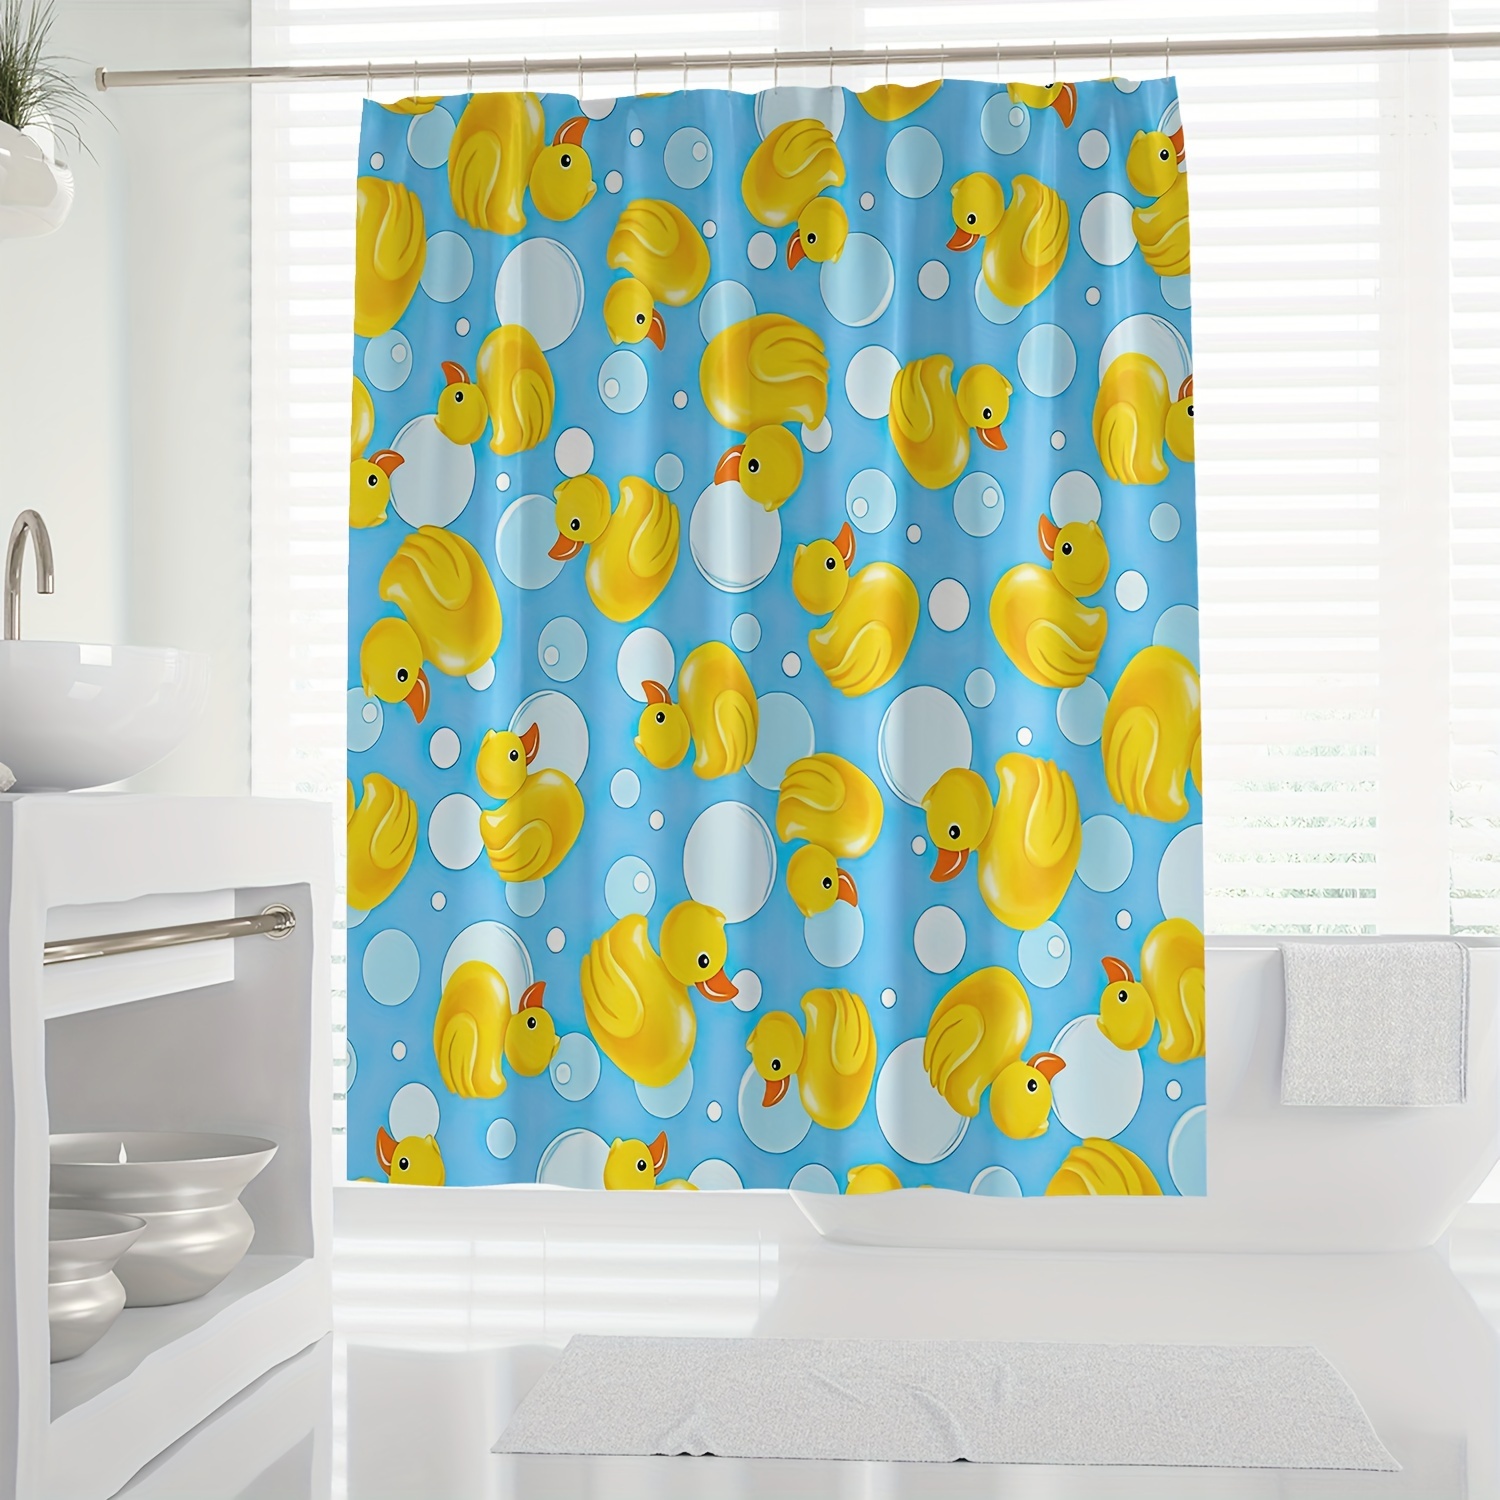 

1pc Summer Yellow Duck Digital Print Shower Curtain With Hooks, Water-resistant Polyester, Machine Washable, Woven Knit Weave, All-season Animal Theme Decor